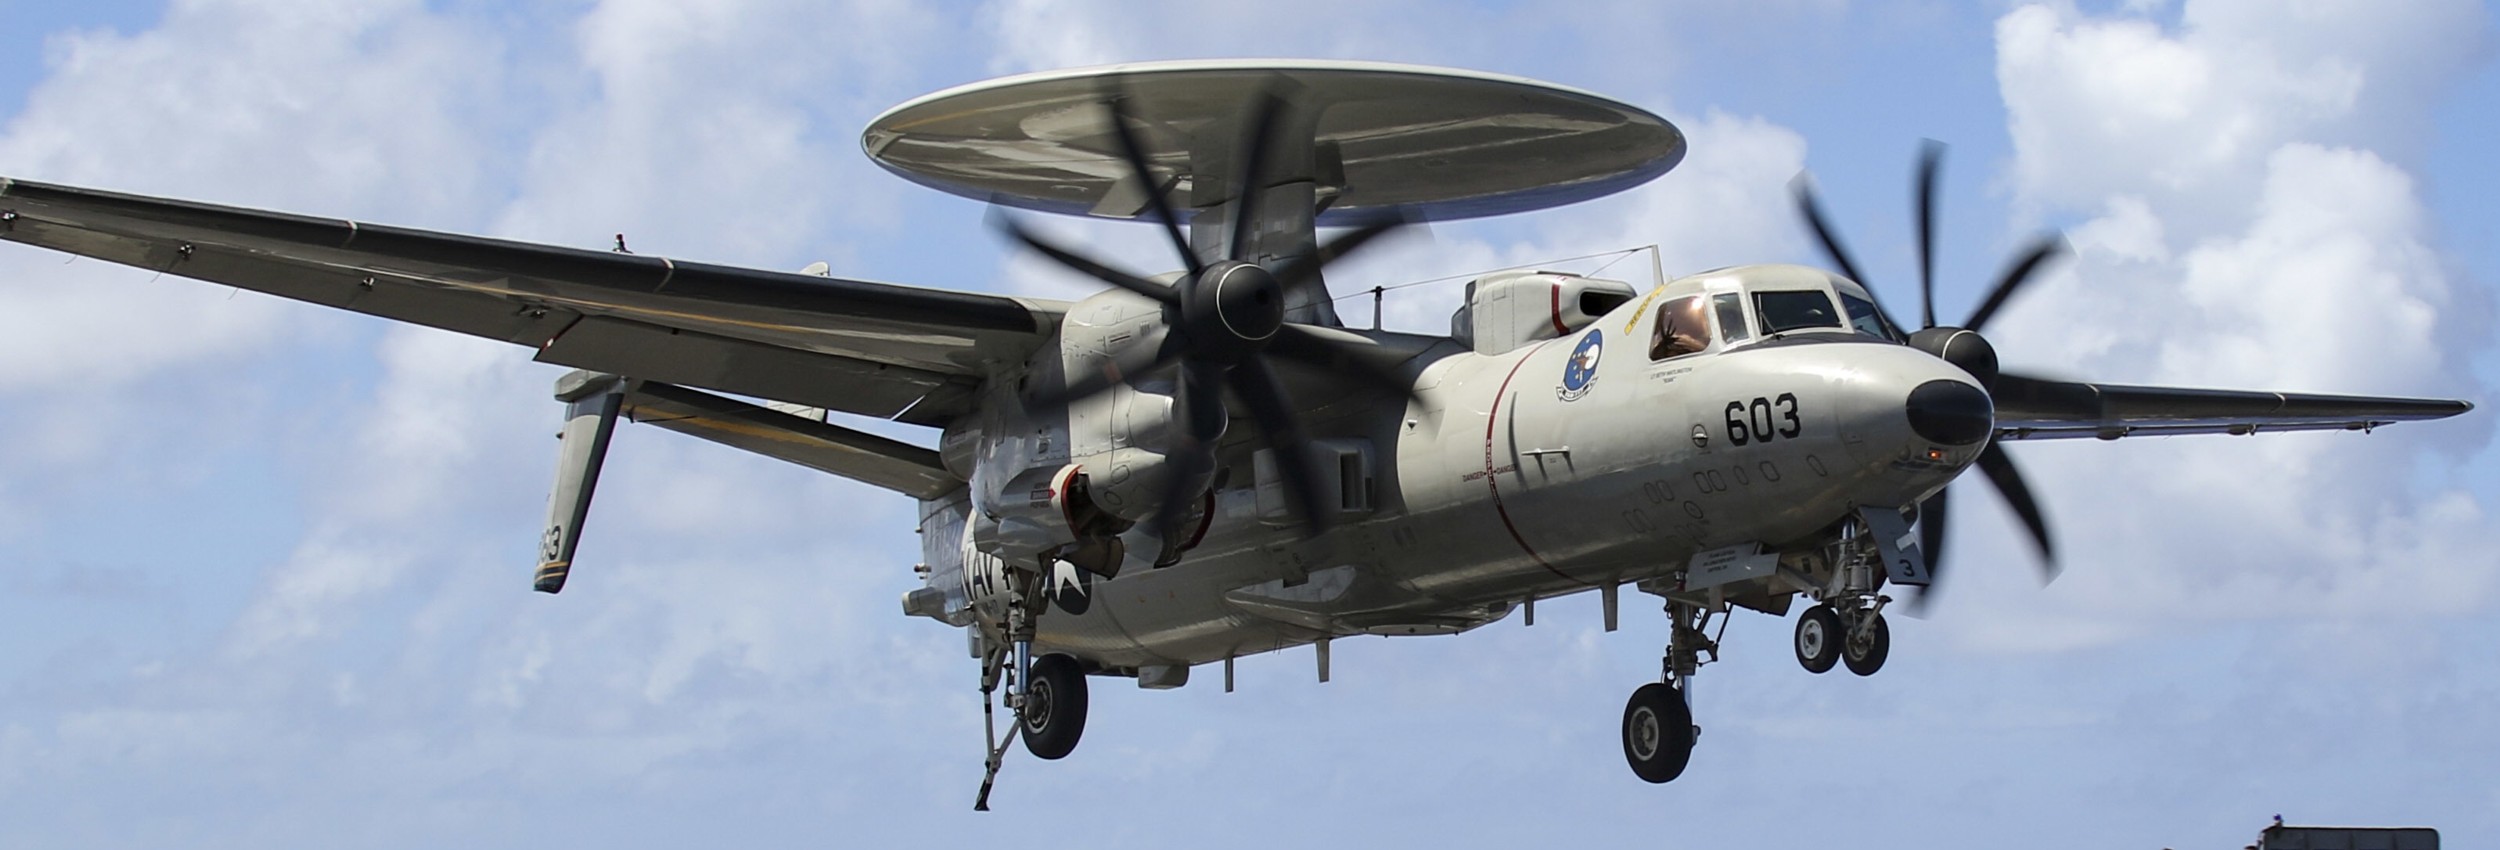 vaw-117 wallbangers airborne command and control squadron navy e-2d hawkeye cvw-9 uss abraham lincoln cvn-72 16